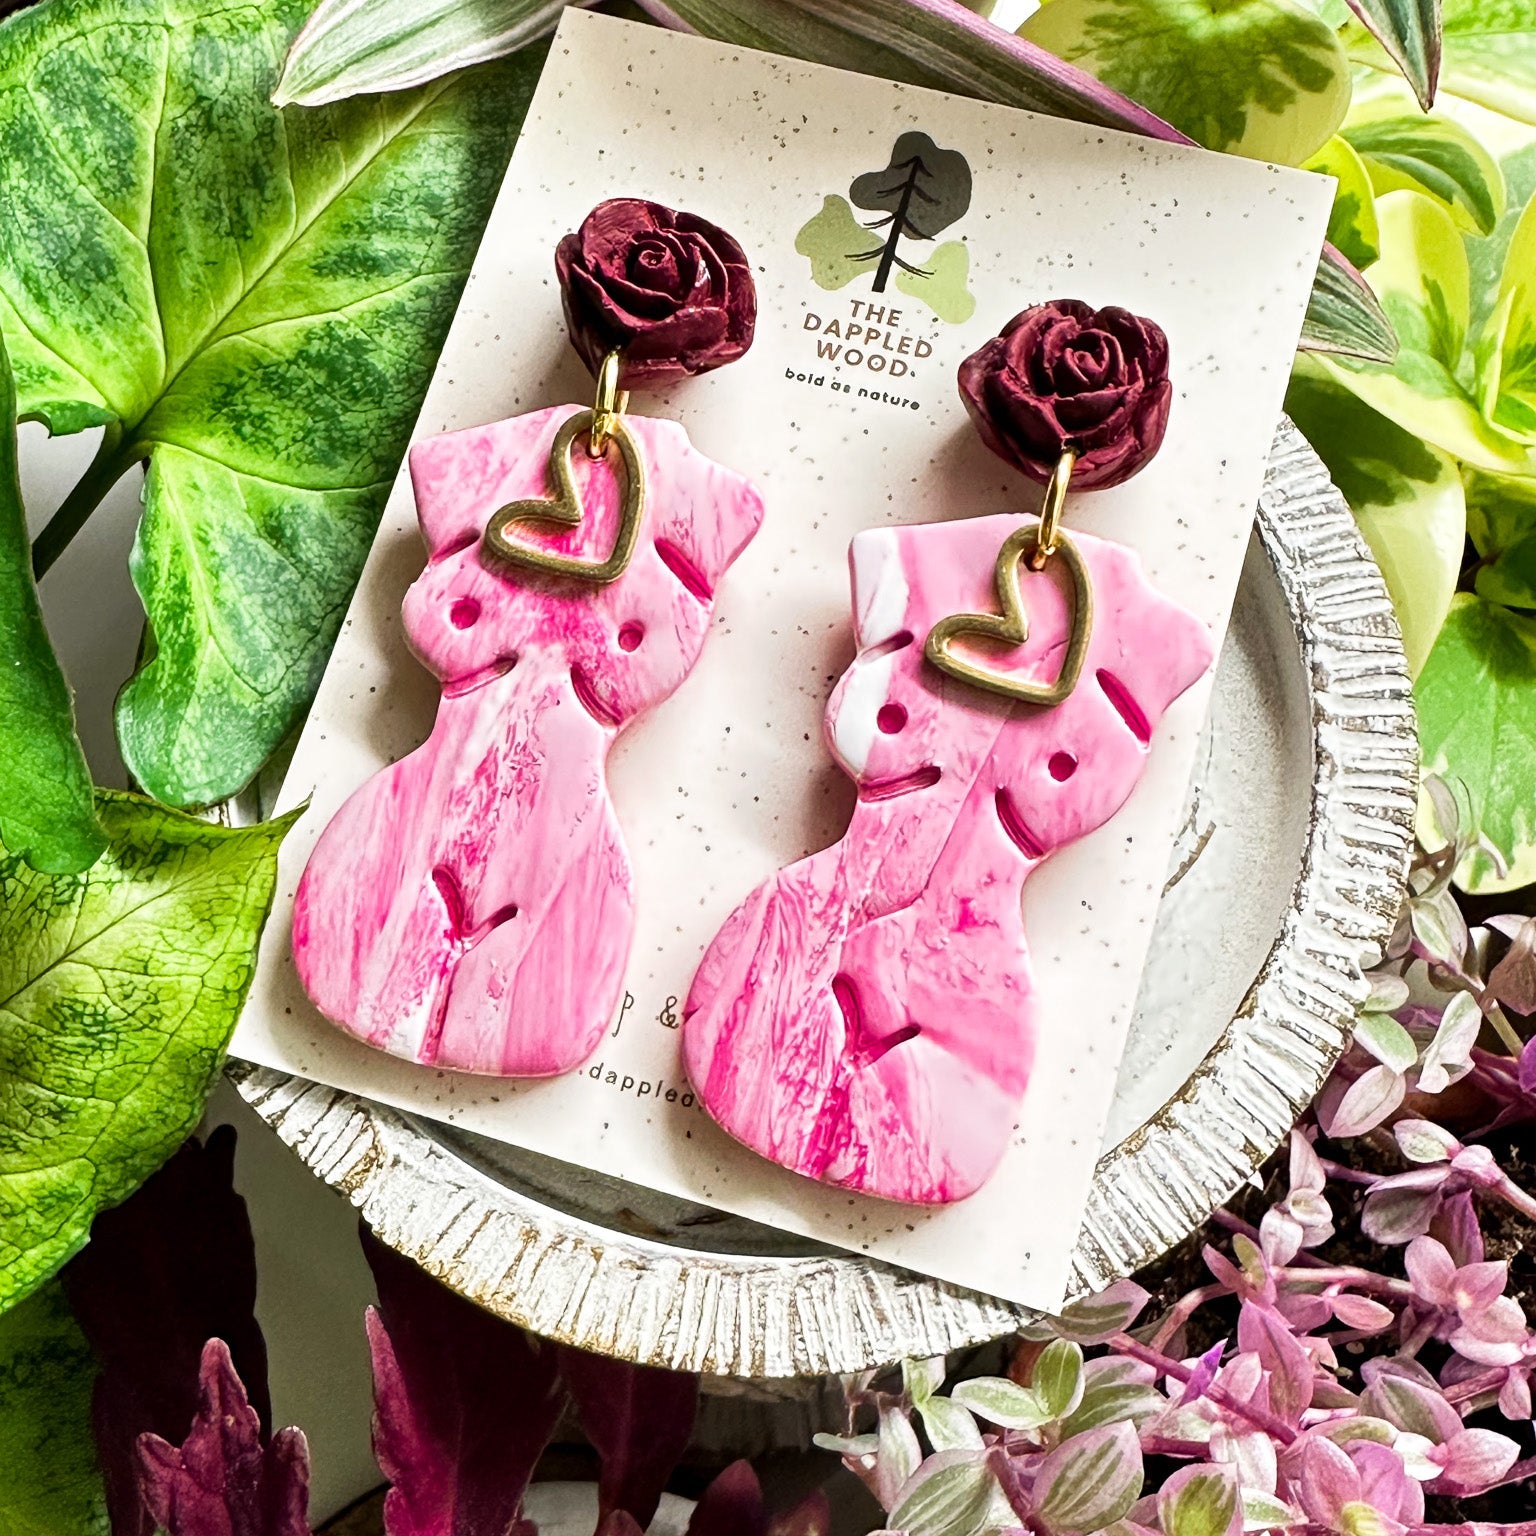 Marbled white and pink polymer clay earrings in the shape of a natural, curvy woman with a gold heart pendant, hanging from deep red rose posts. Earrings are showcased on a branded 'The Dappled Wood' card surrounded by lush greenery.